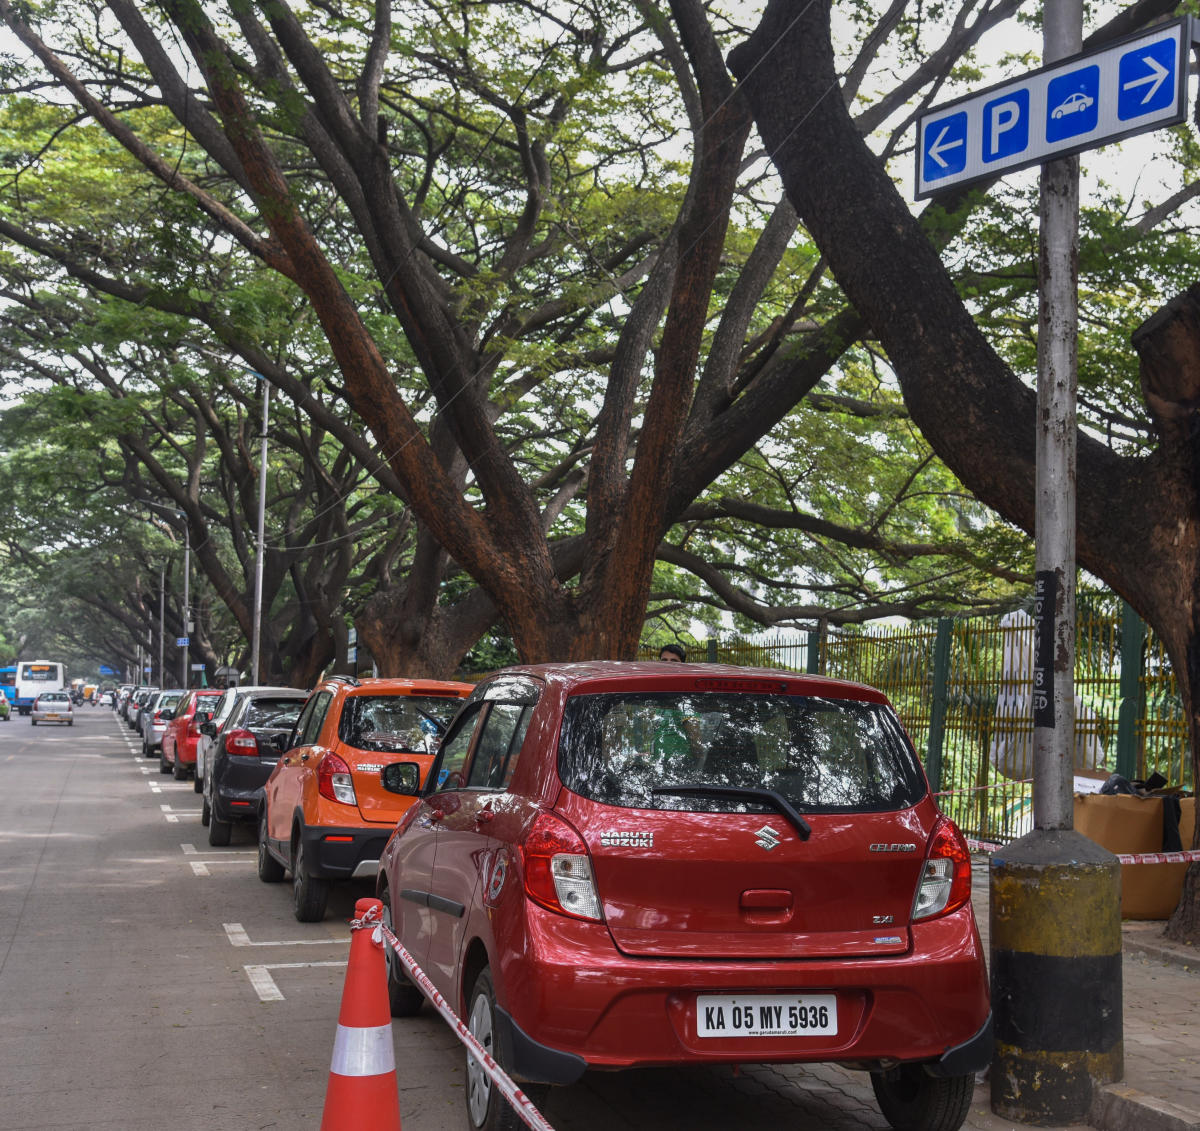 Parking will no longer be free on public roads in Bangalore 